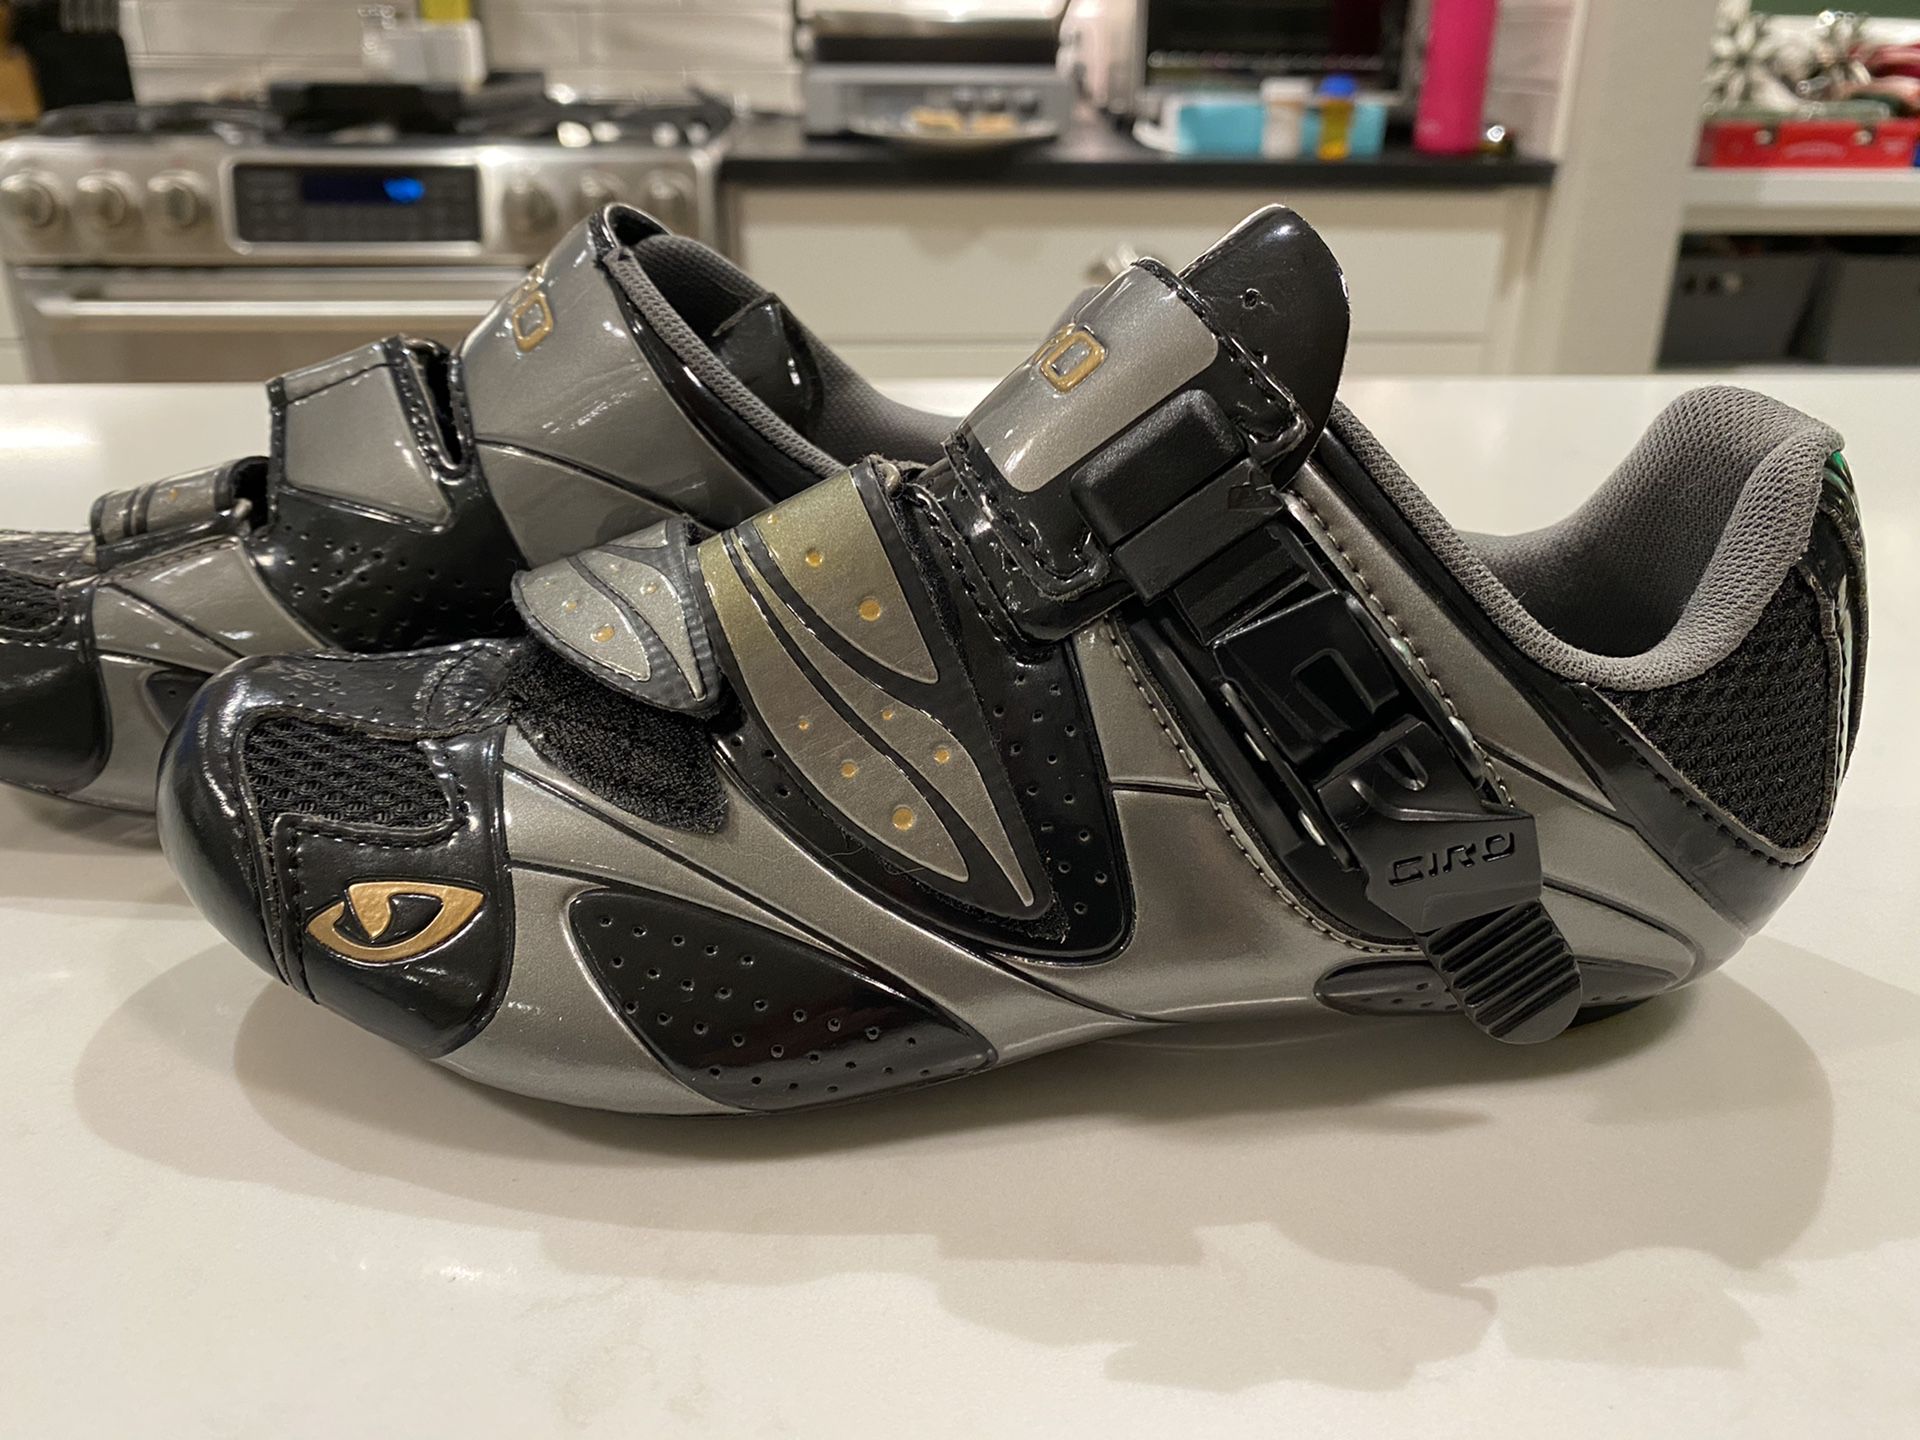 Giro Women’s Road Cycle Bike Shoes - 37 EU but fits like a 36 or 35. US 5.5 or 6 is perfect